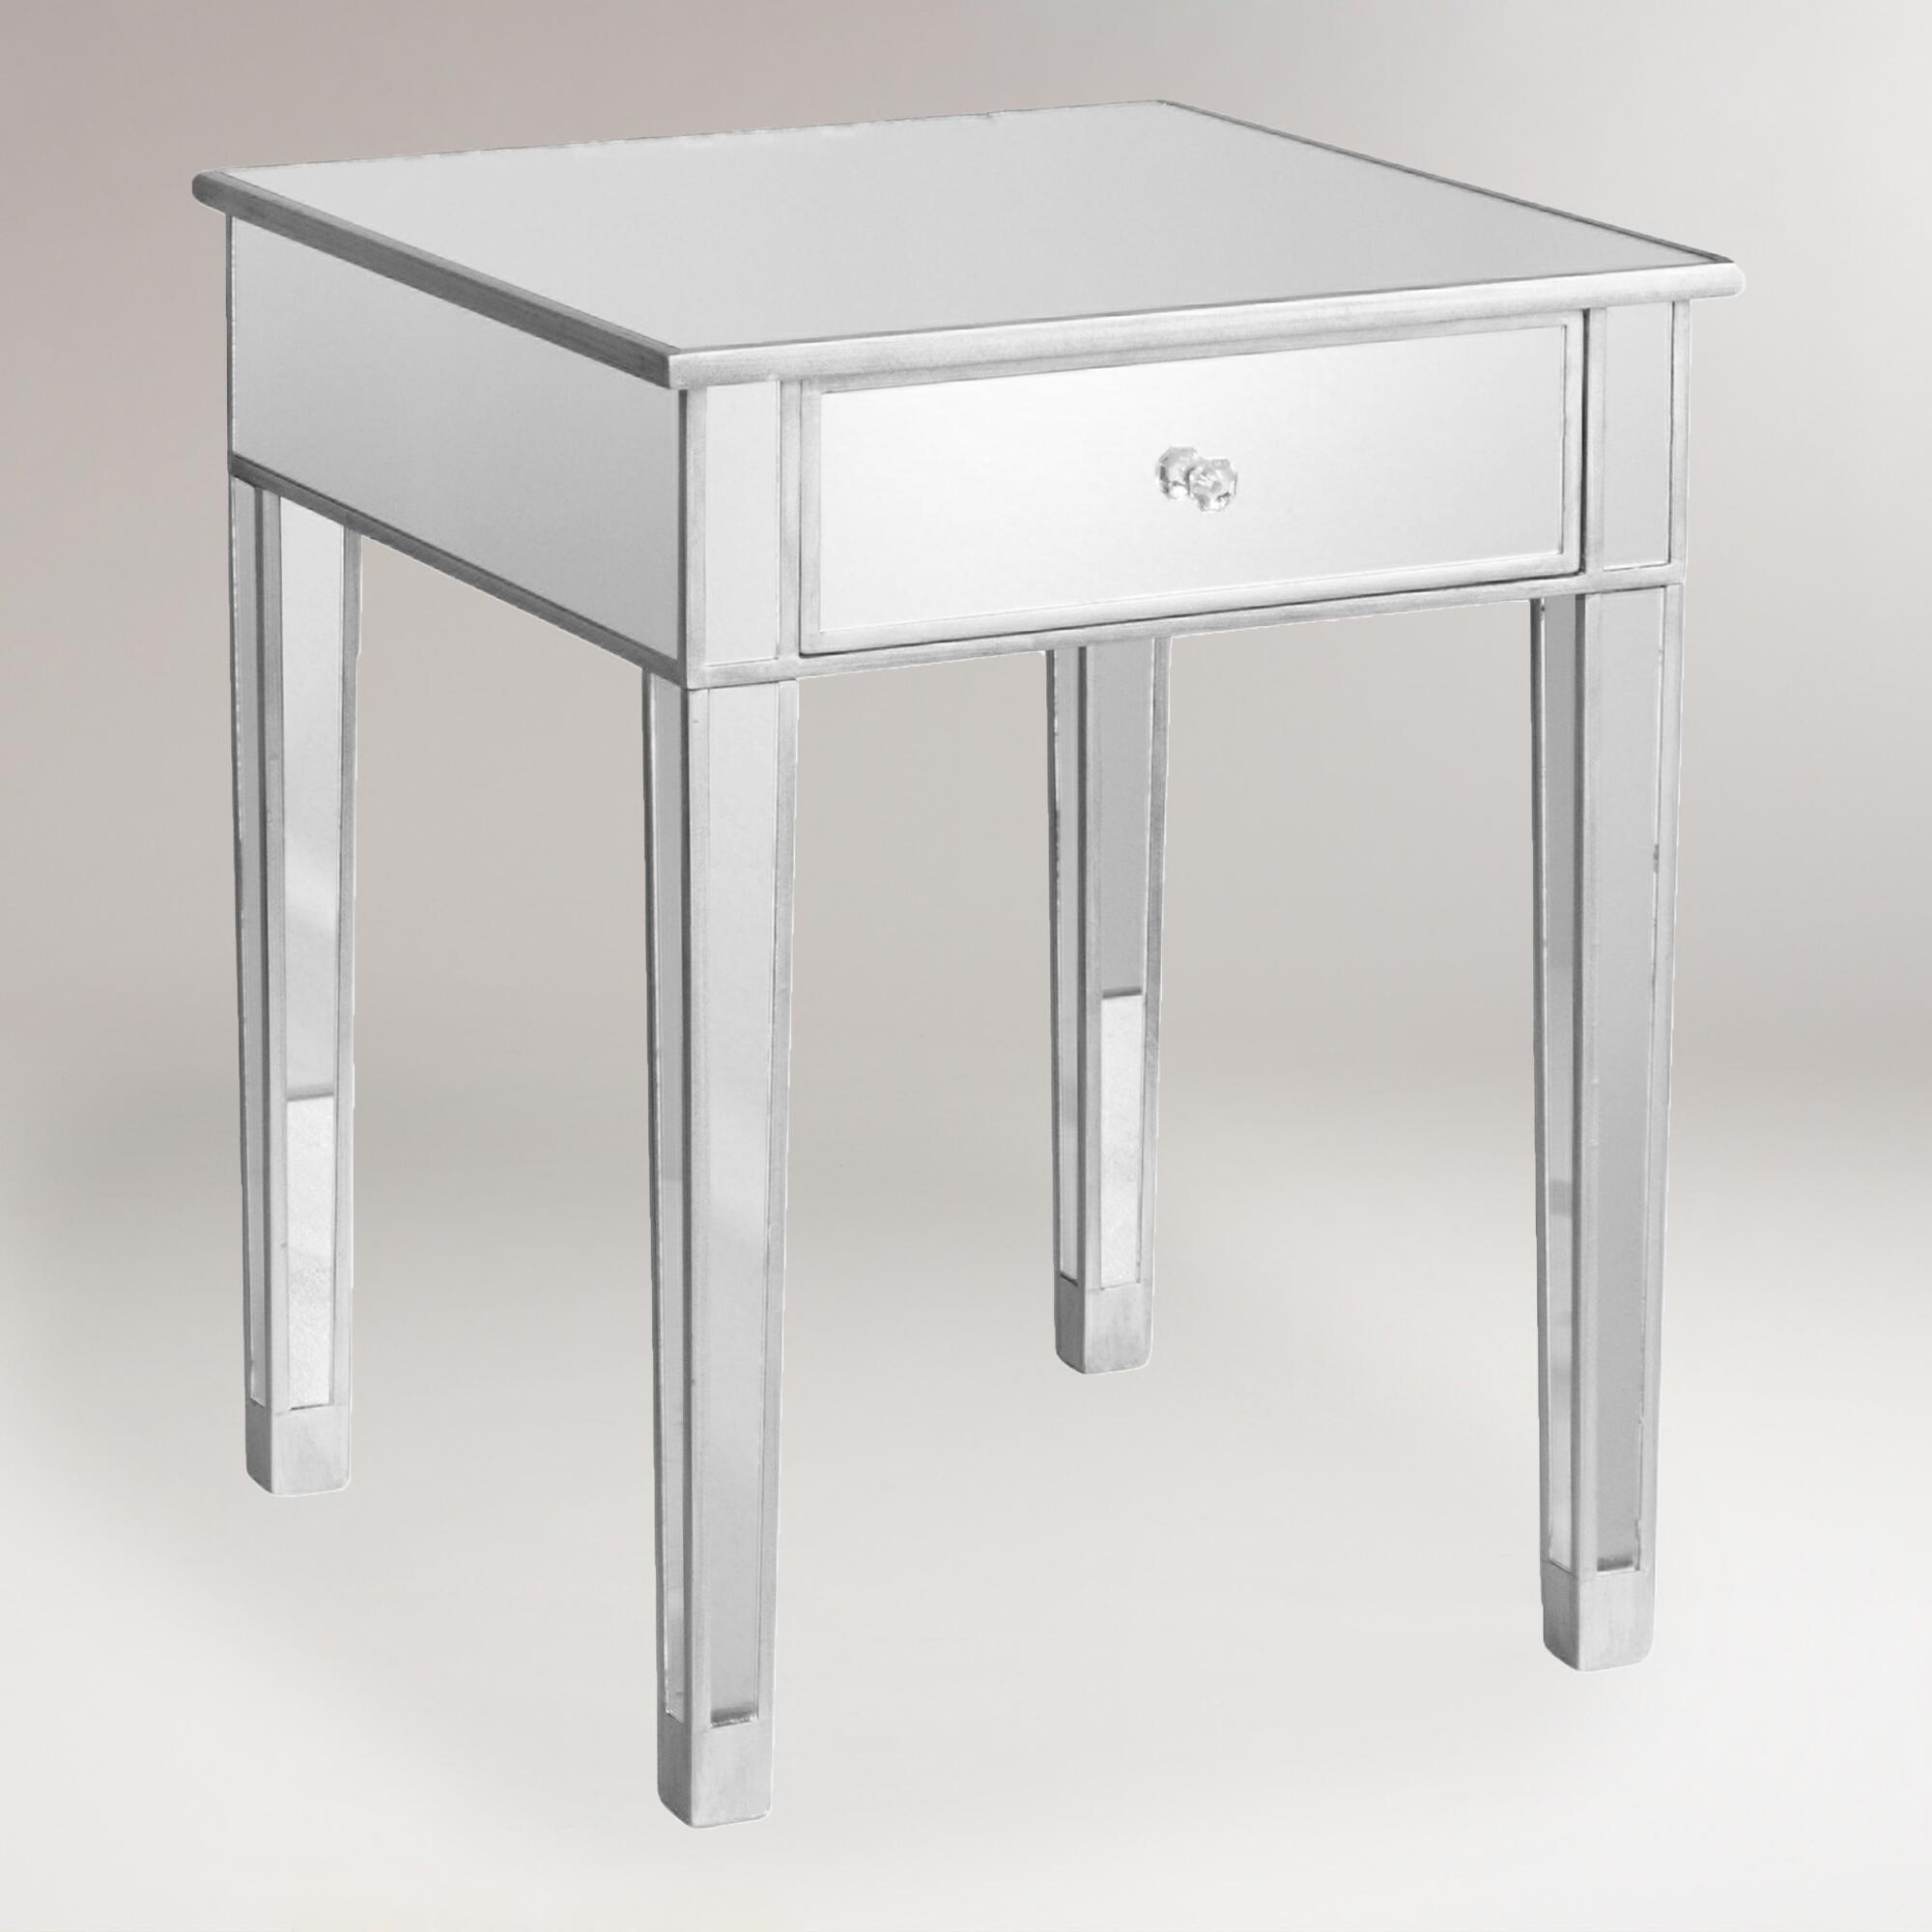 home decor alluring mirrored end tables accent table world market toronto apply your ukalluring ikeaalluring junior drum seat small porch chairs uttermost mirrors circular patio